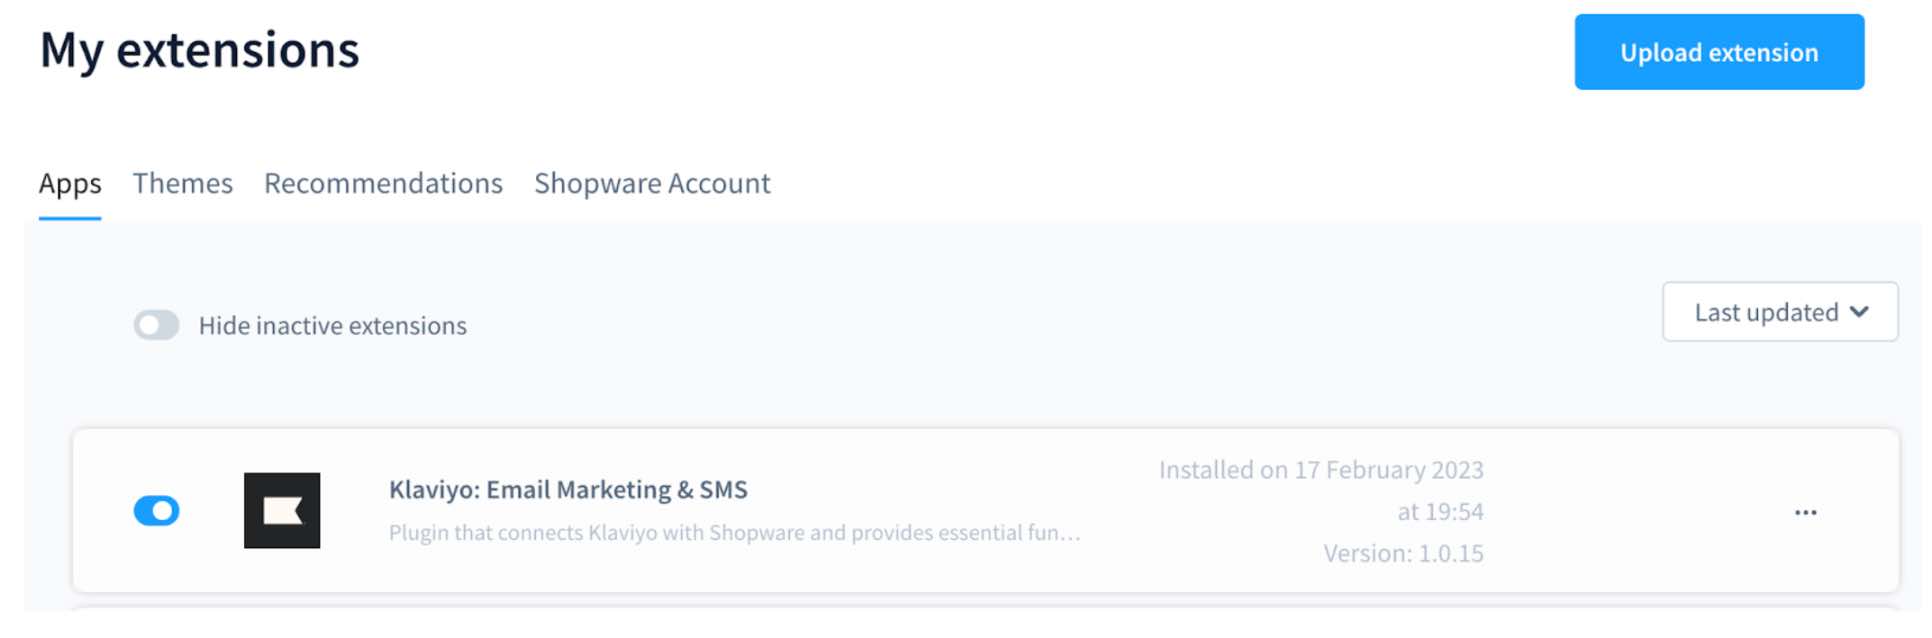 My extensions with Klaviyo: Email & SMS Marketing toggled on blue